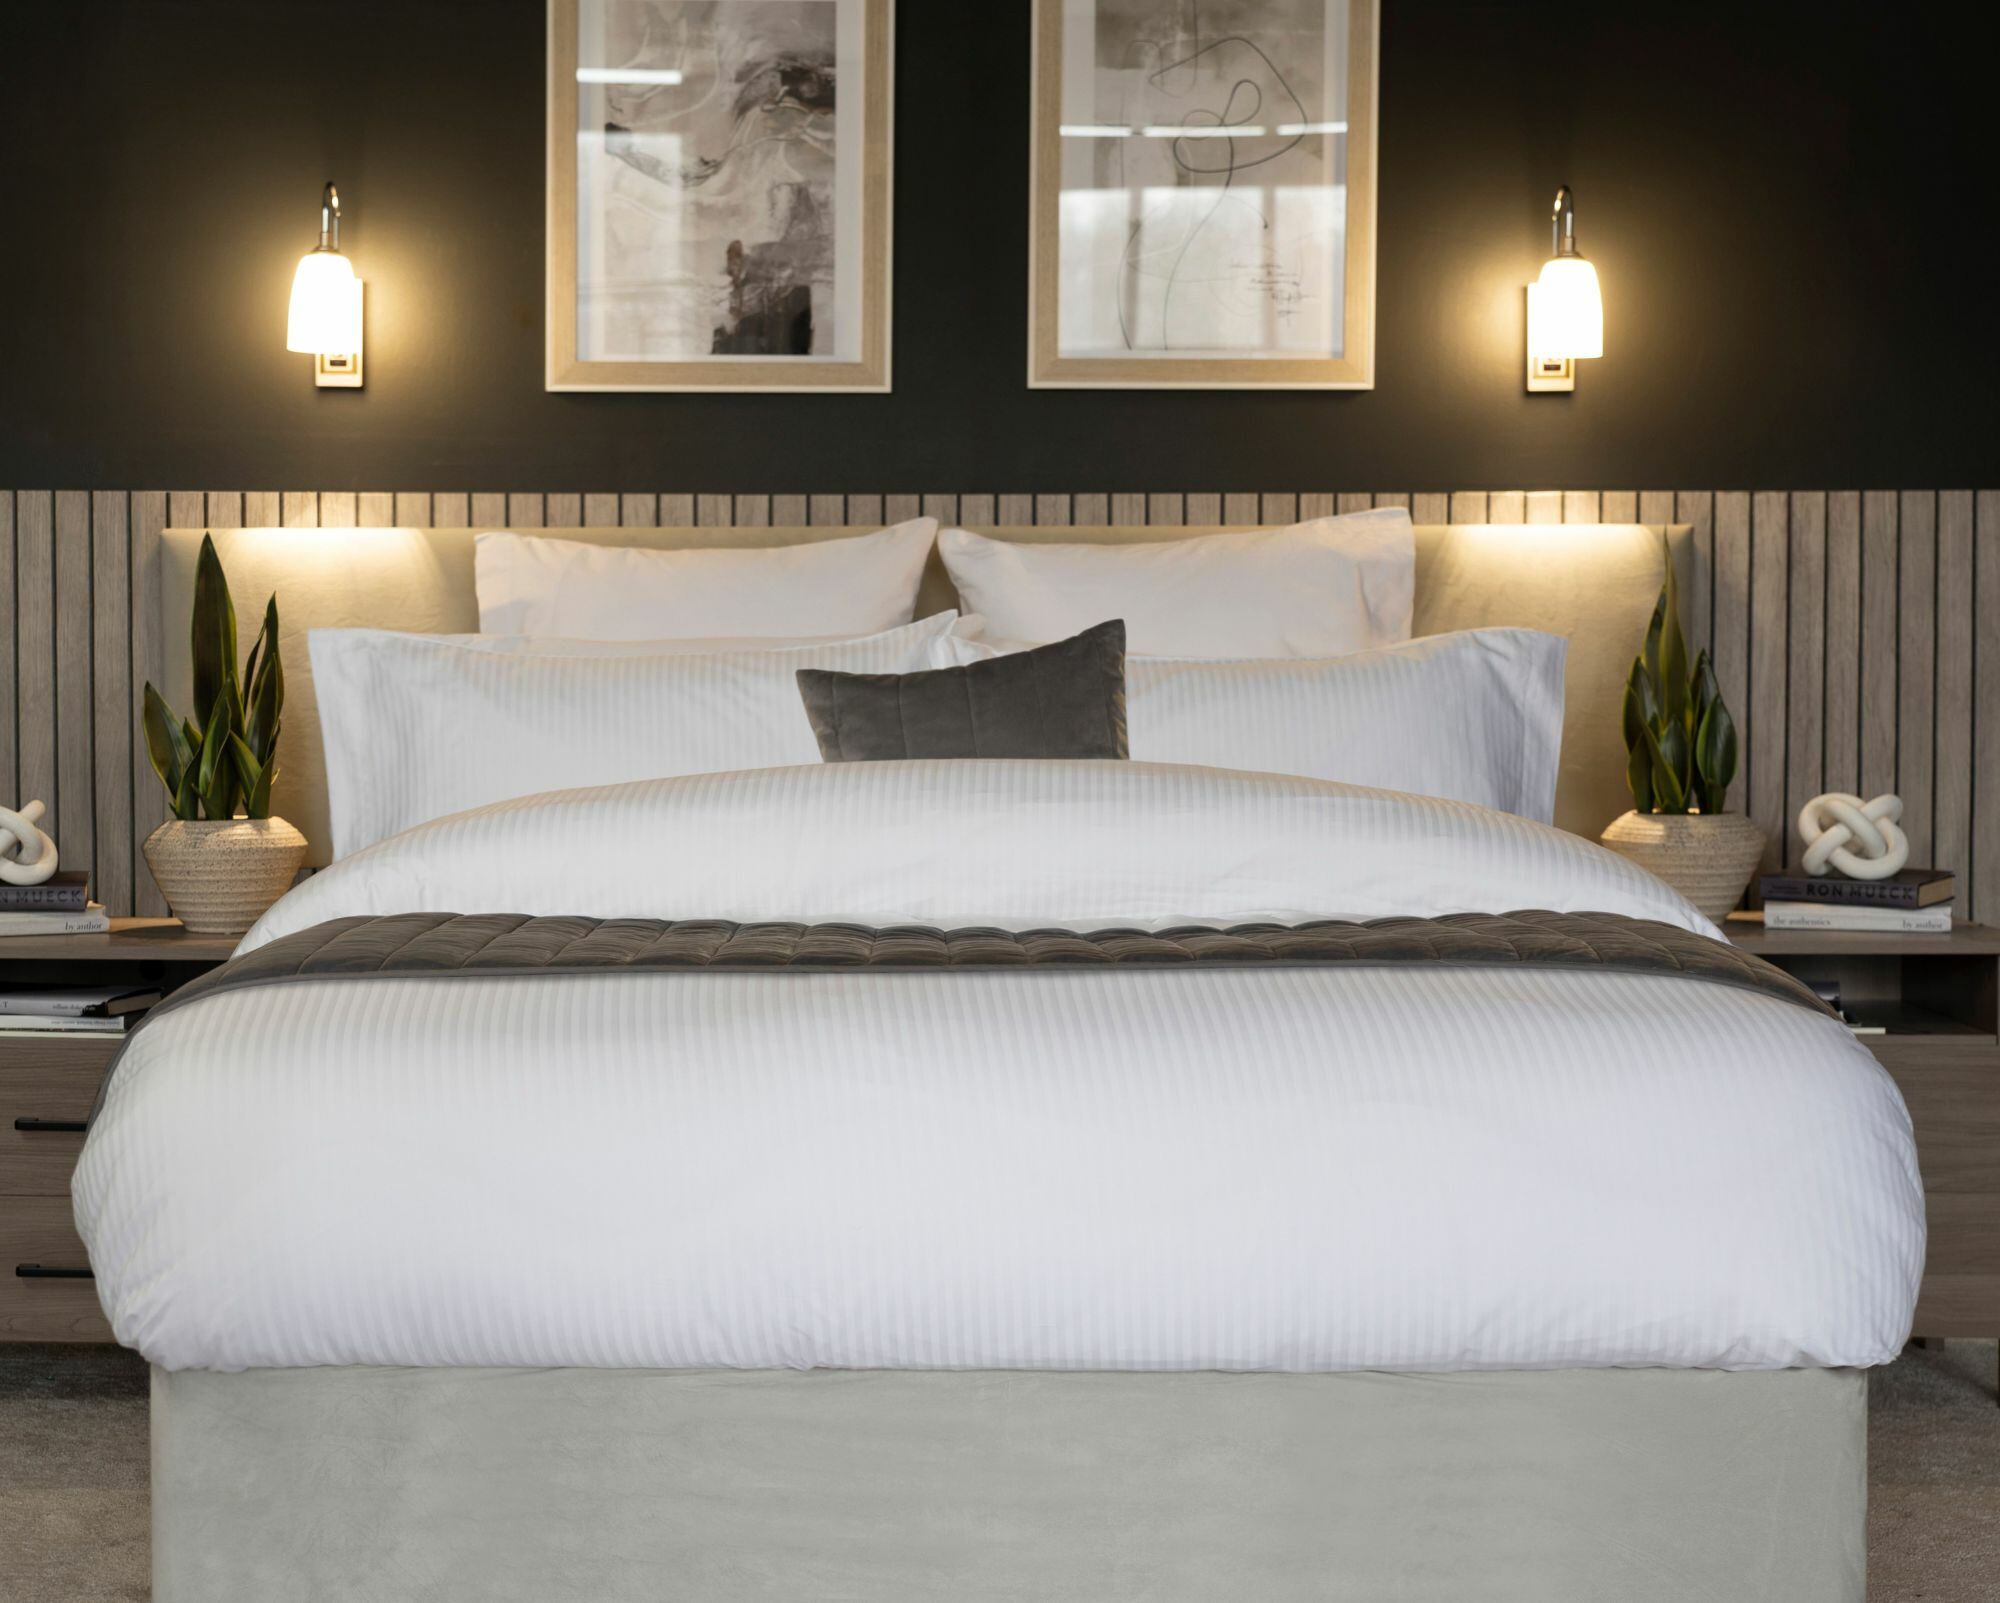 Why Do Hotel Beds Feel Better: Fabrics, Quality & Comfort Explained